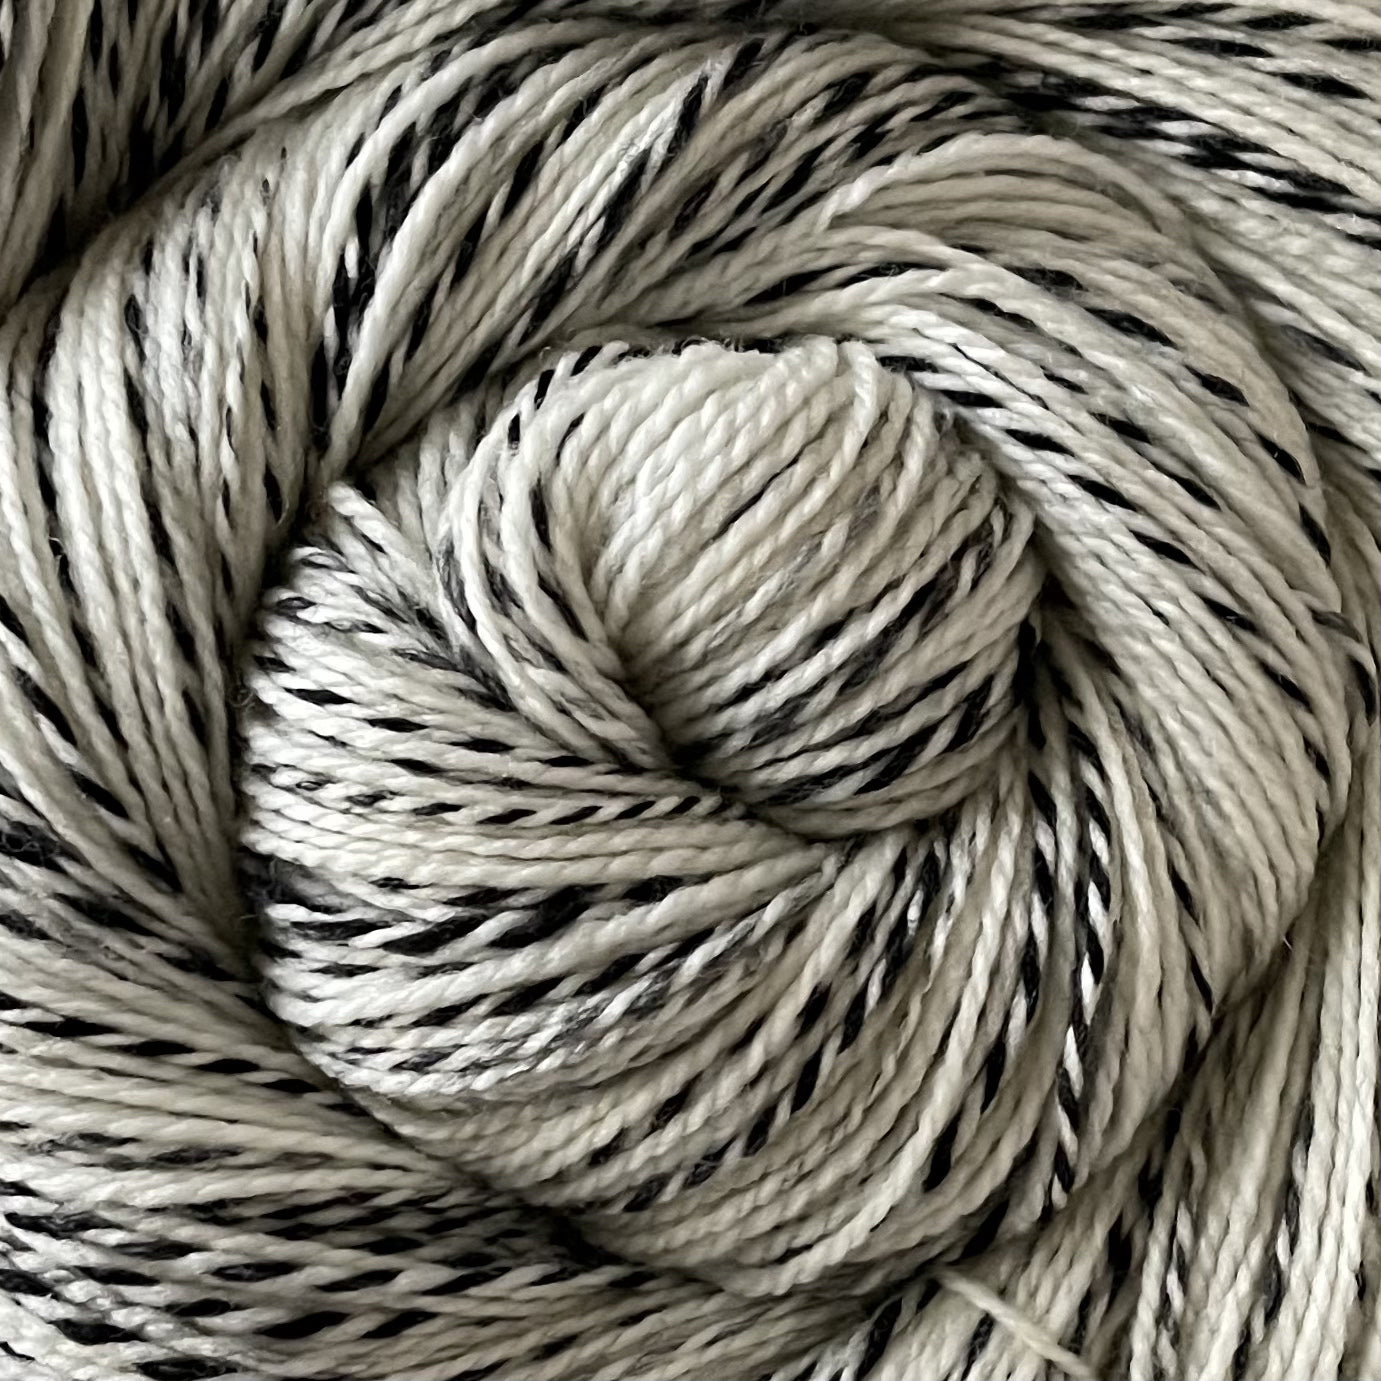 Undyed Wool Yarn Pack in Grey and White Colors, Fingering Weight